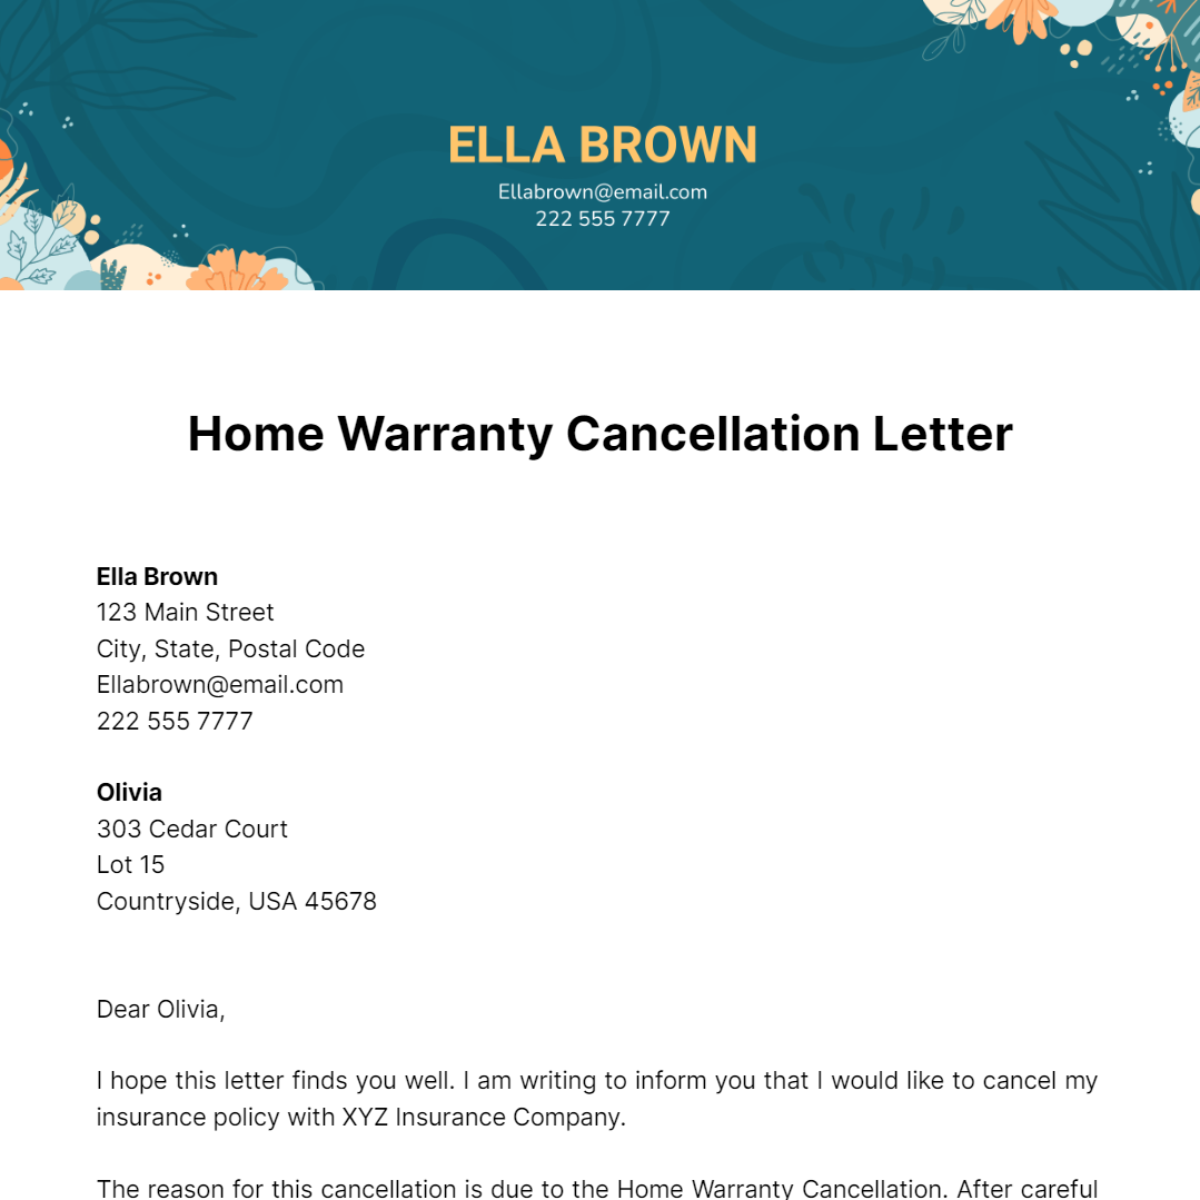 Home Warranty Cancellation Letter Template